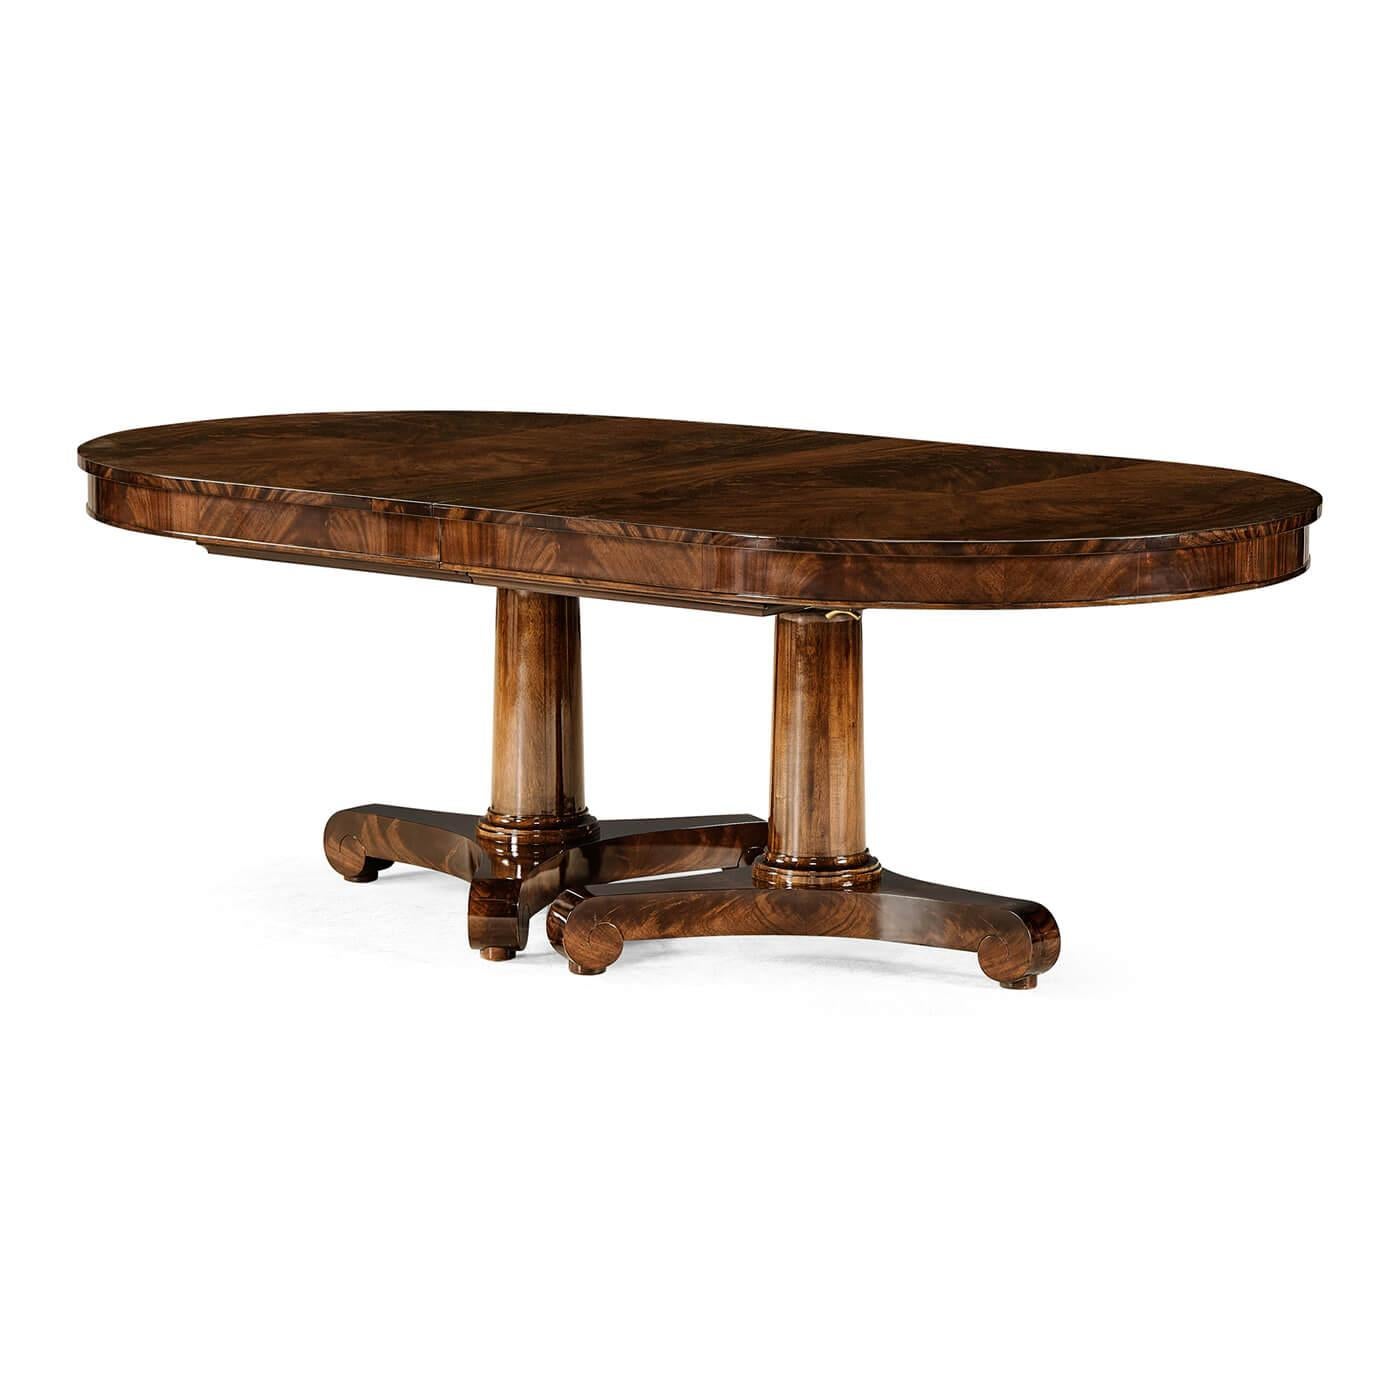 A 19th century-style Classical style d-end dining table fully veneered in fine crotch mahogany with two self-storing leaves. With bold column form twin pedestal bases set on elegant scrolling trefoil bases.

Open dimensions: 132